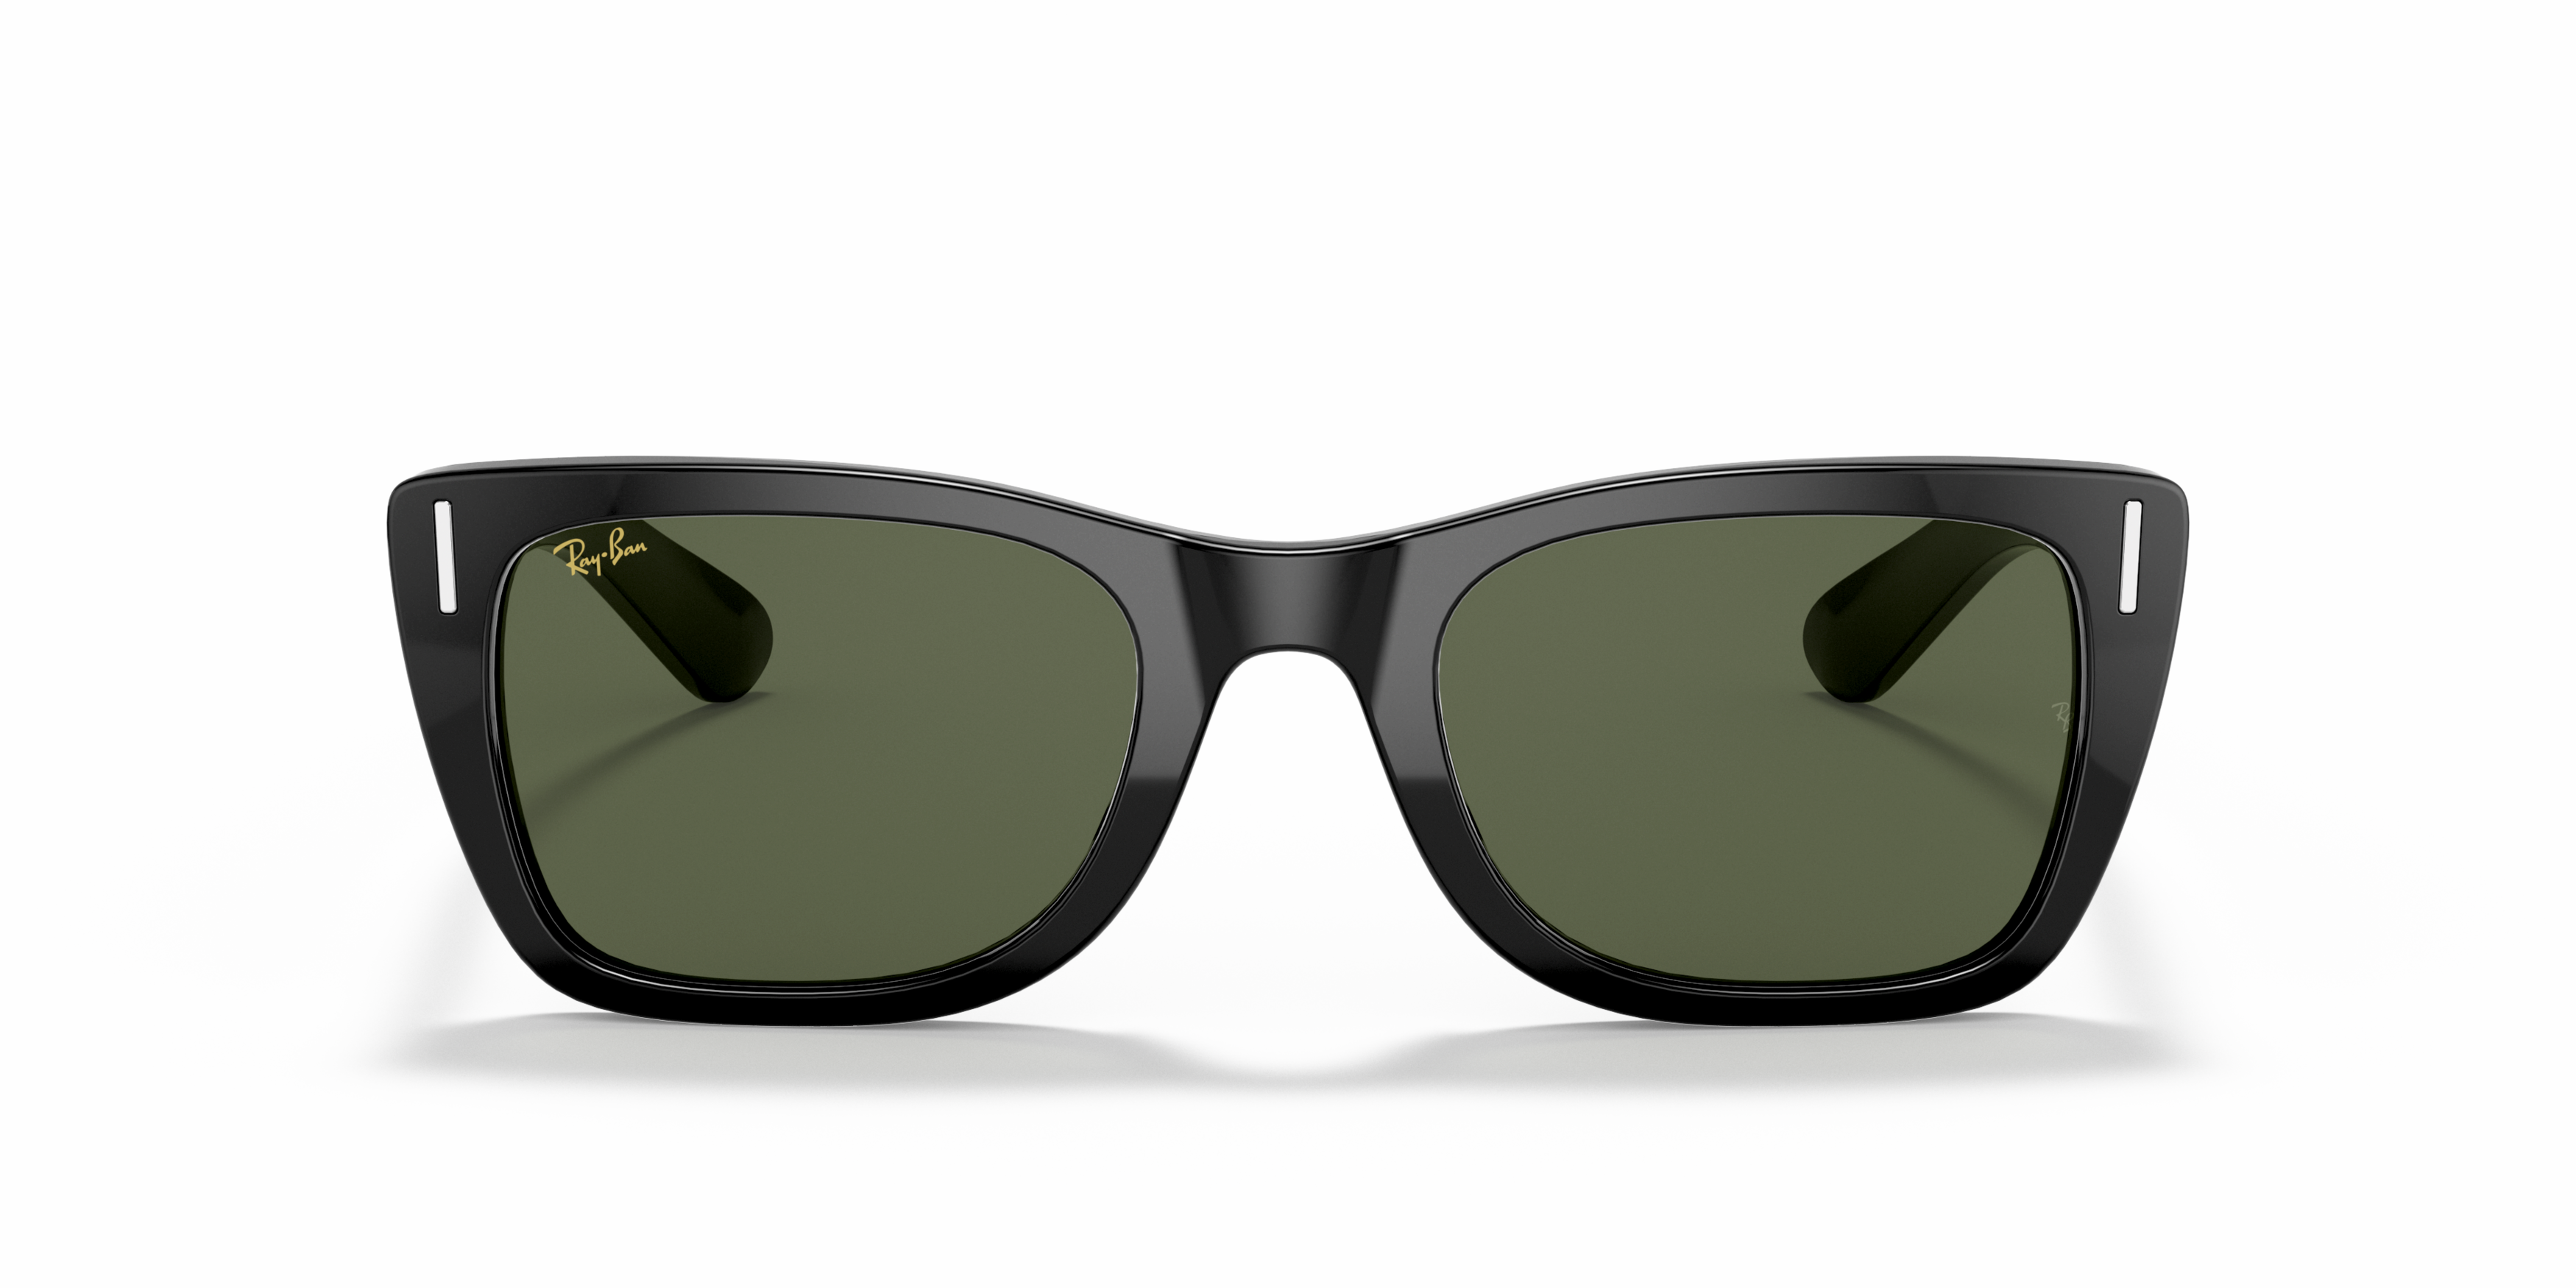 [products.image.front] RAY-BAN RB2248 901/31